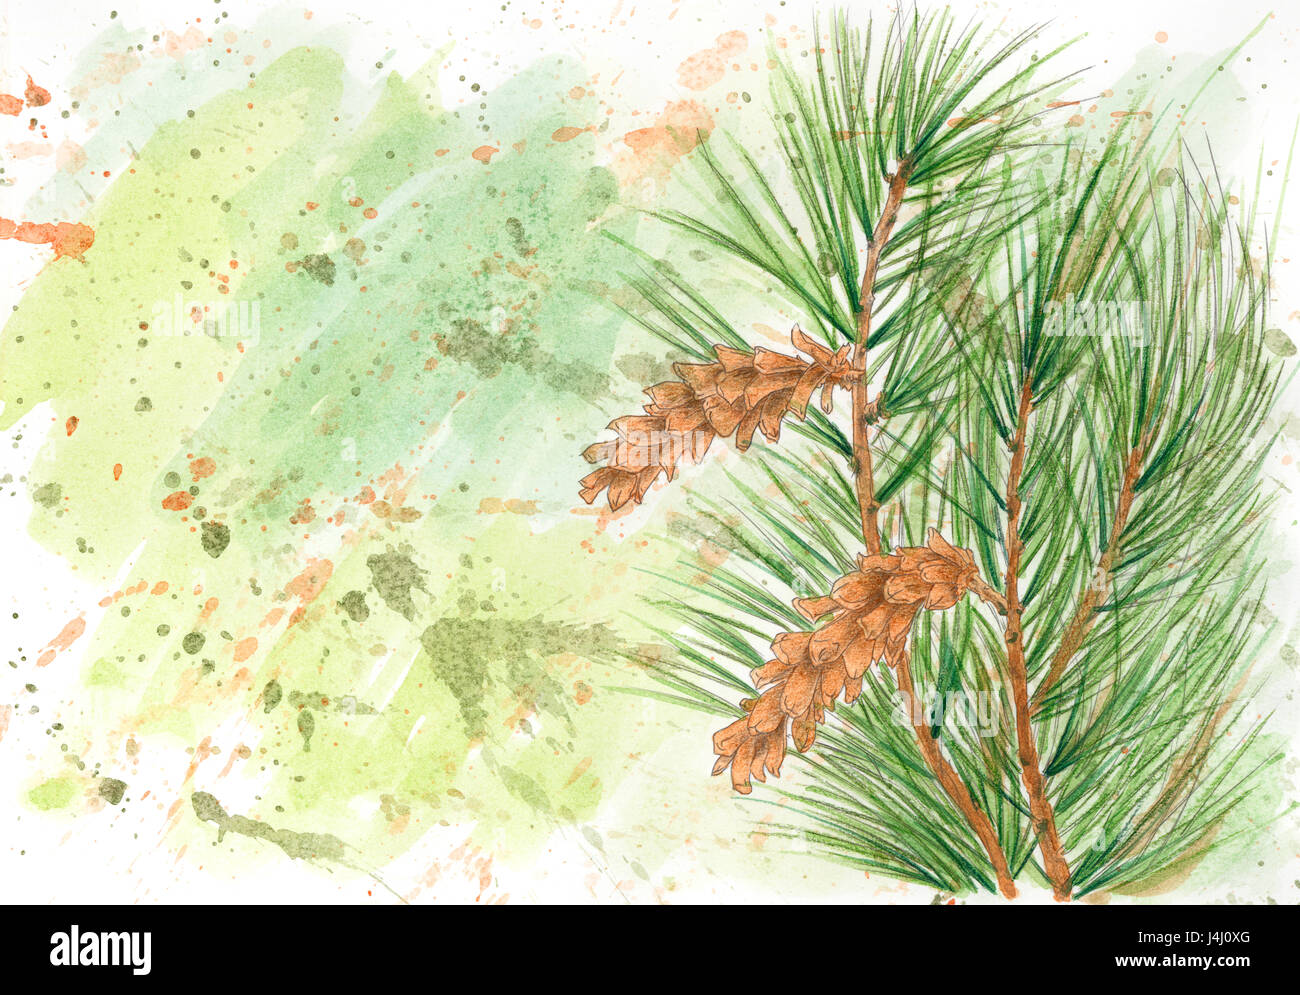 Grunge background with Weymouth pine (Pinus strobus). Splash paint technique. Colored pencils and watercolor on paper. Stock Photo